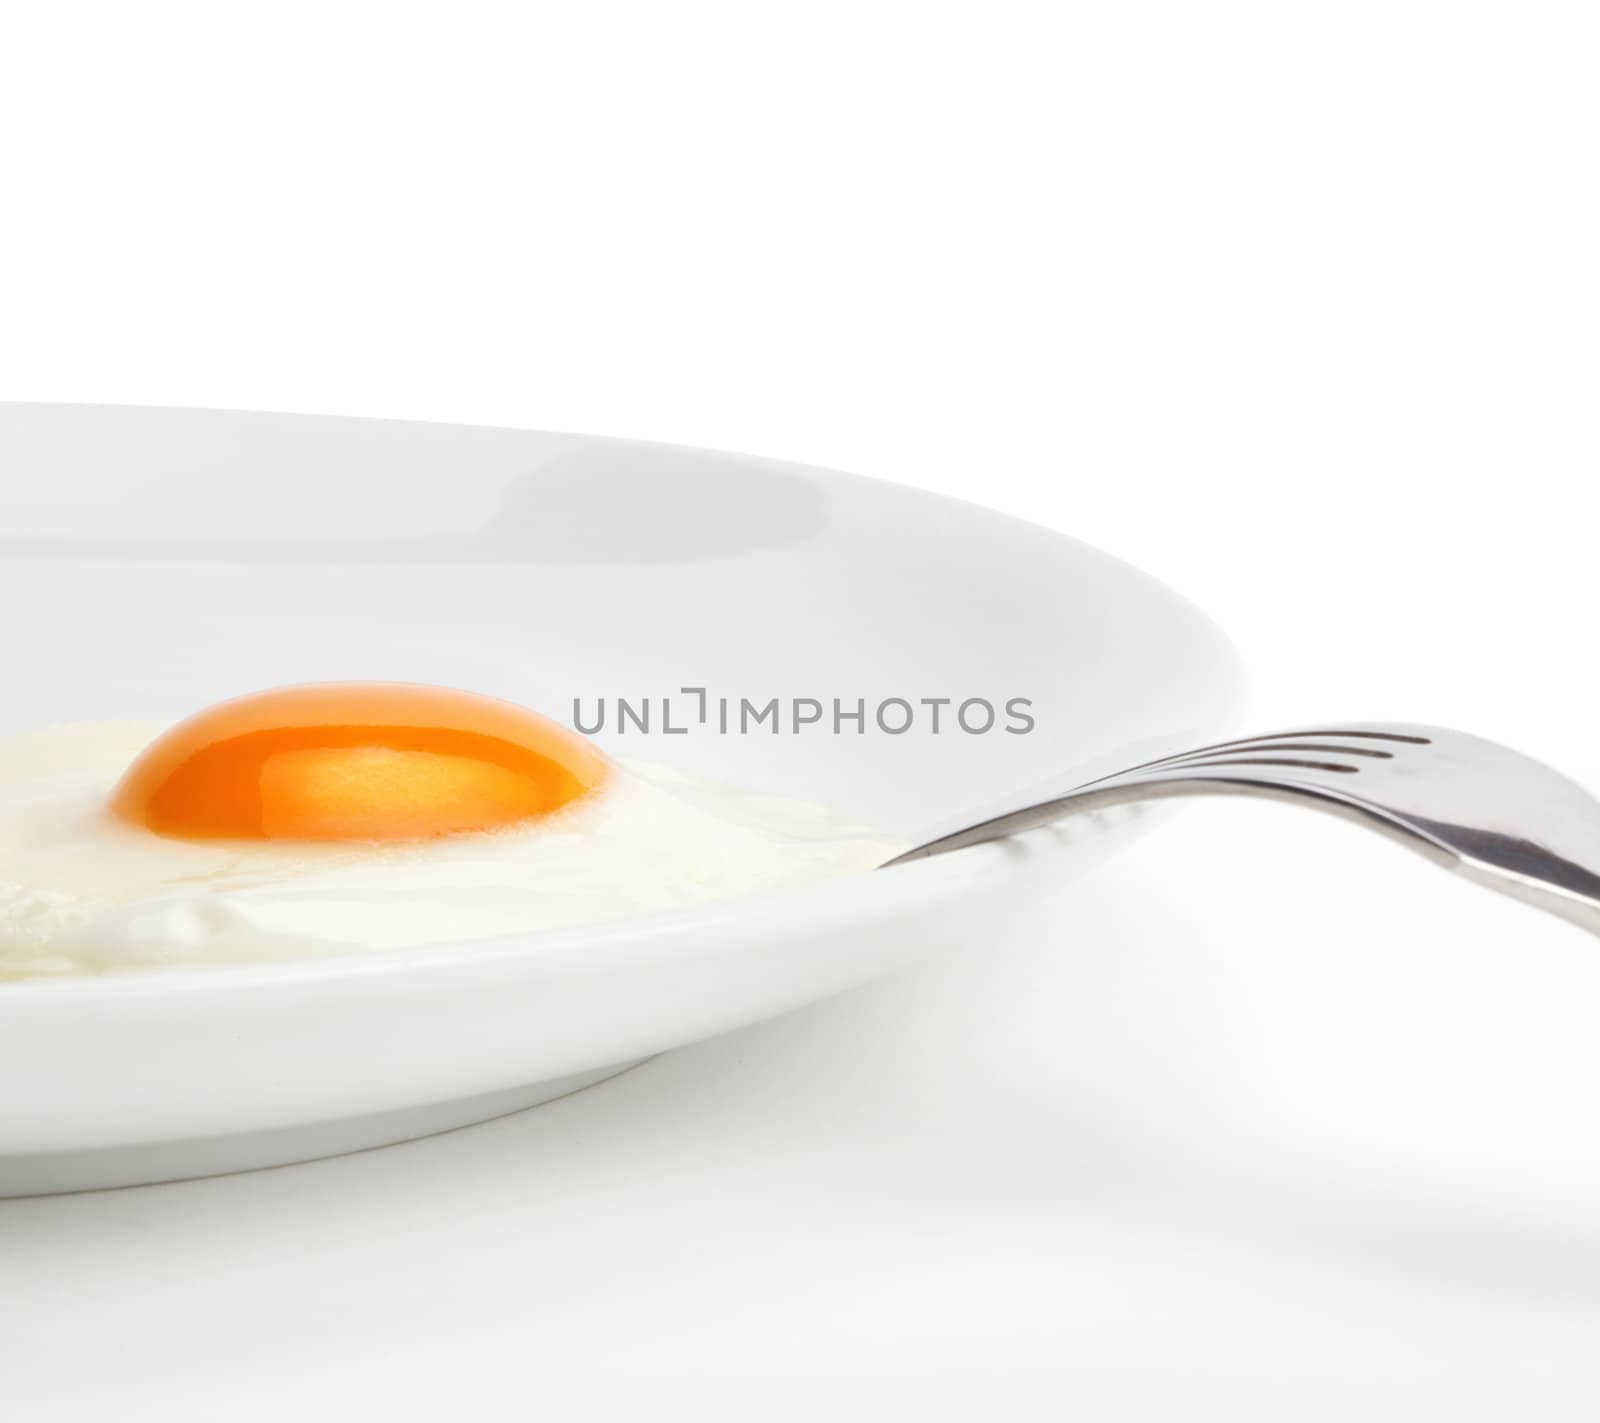 fried egg on plate by rudchenko